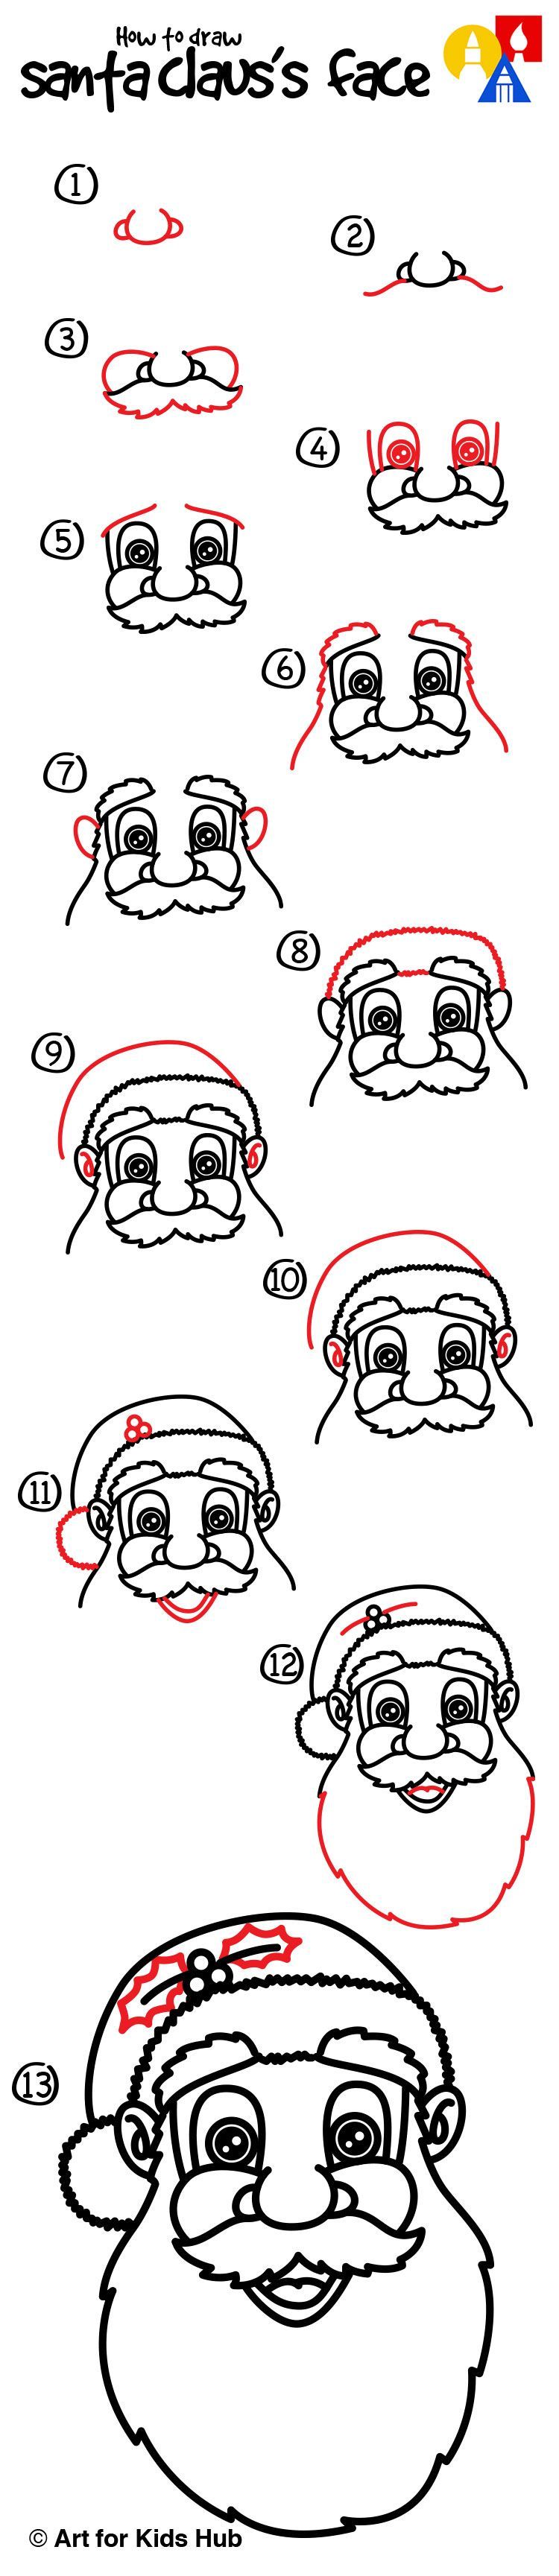 How to draw Santa Claus’s face!